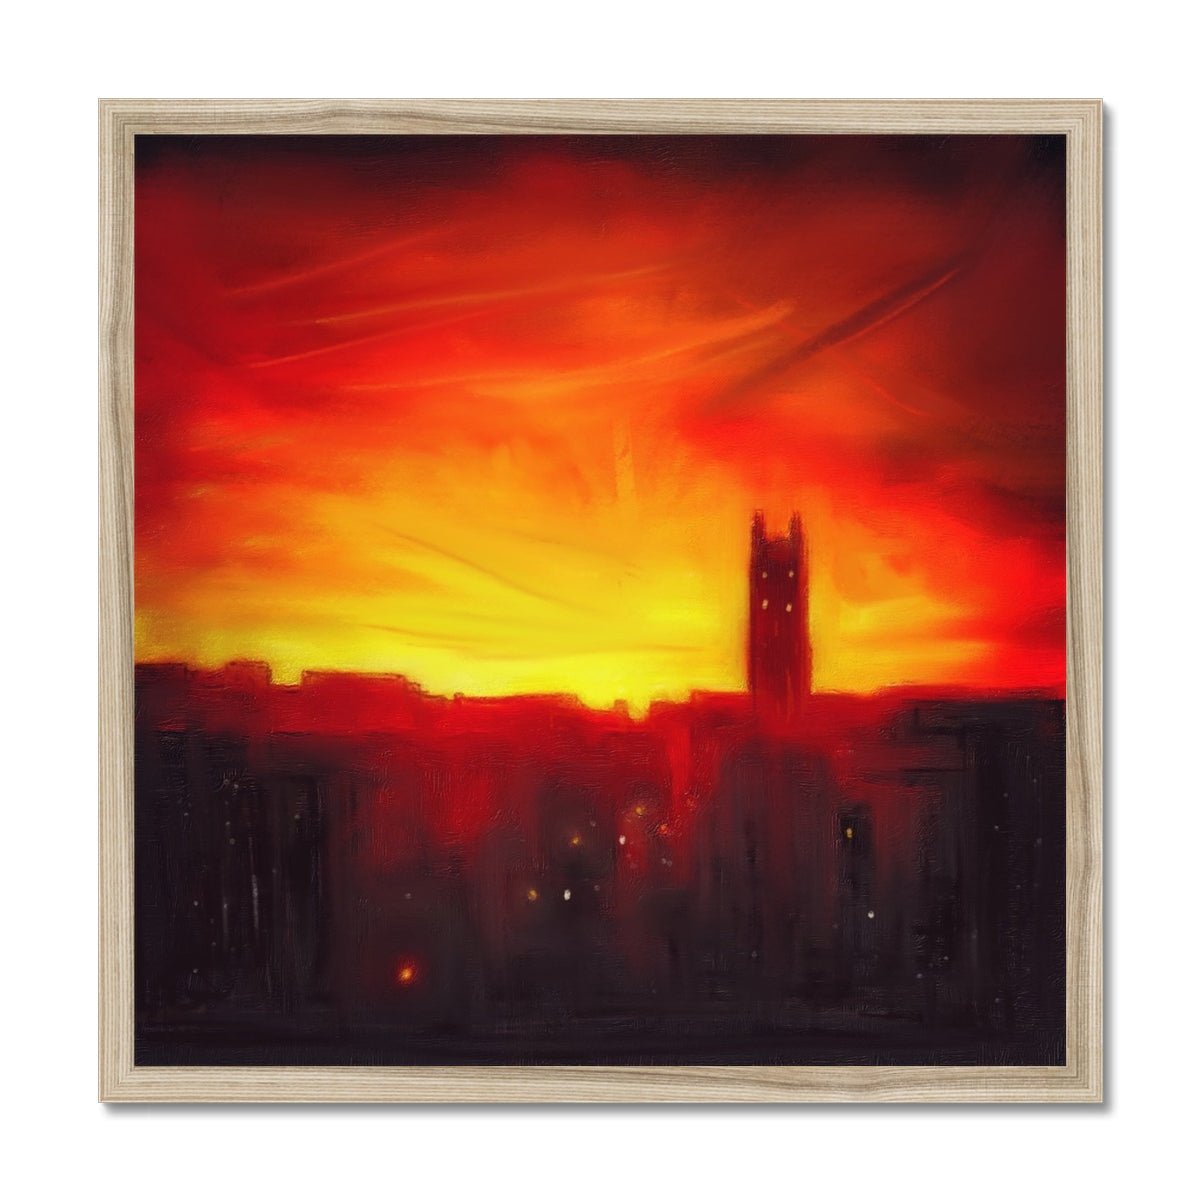 St Stephen's Church Sunset Painting | Framed Prints From Scotland-Framed Prints-Edinburgh & Glasgow Art Gallery-20"x20"-Natural Frame-Paintings, Prints, Homeware, Art Gifts From Scotland By Scottish Artist Kevin Hunter